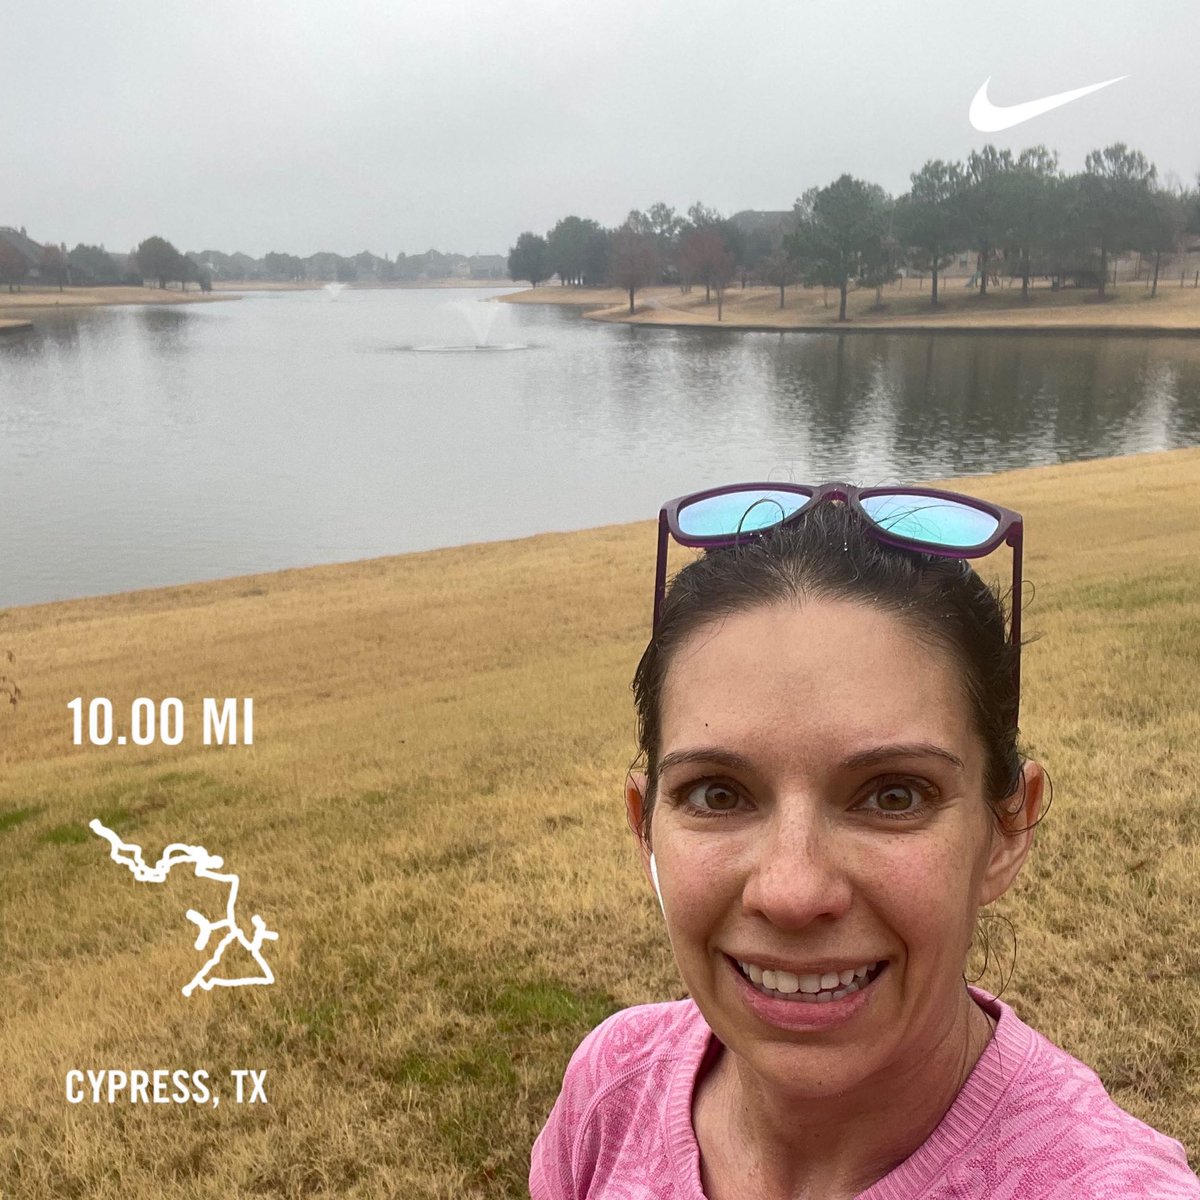 🏃🏻‍♀️Here’s to an incredible 2023 with great health & no surgeries!  Starting off big with help from ⁦@bennettrun⁩ ⁦@NikeService⁩ @lululemon⁩- haven’t run this since the summer! 🥳 Happy New Year! #thisisaboutrunning #thisisnotaboutrunning